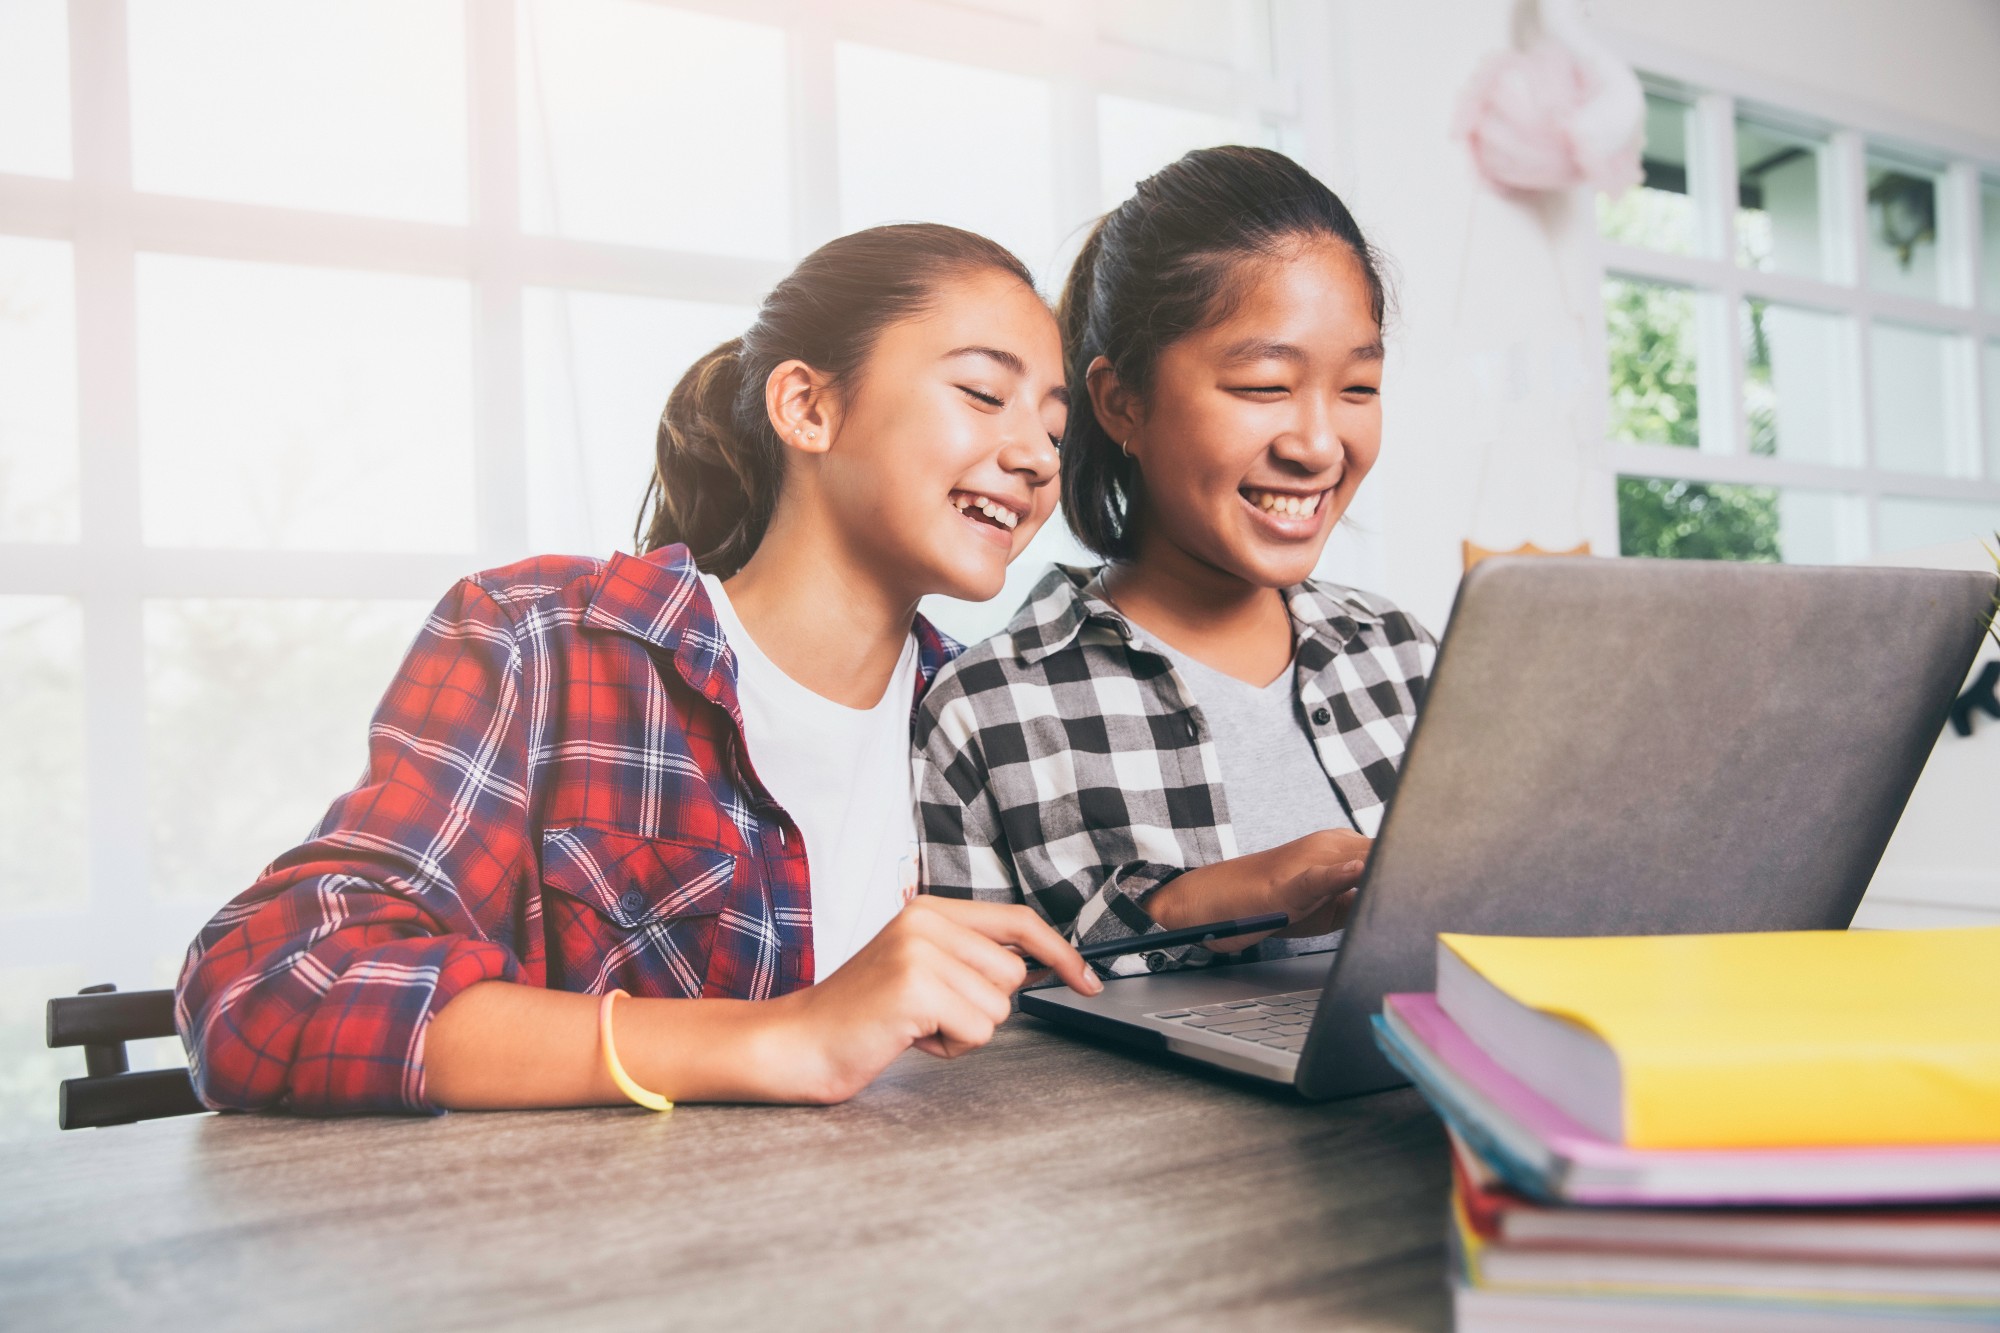 Two girls smiling looking at computer